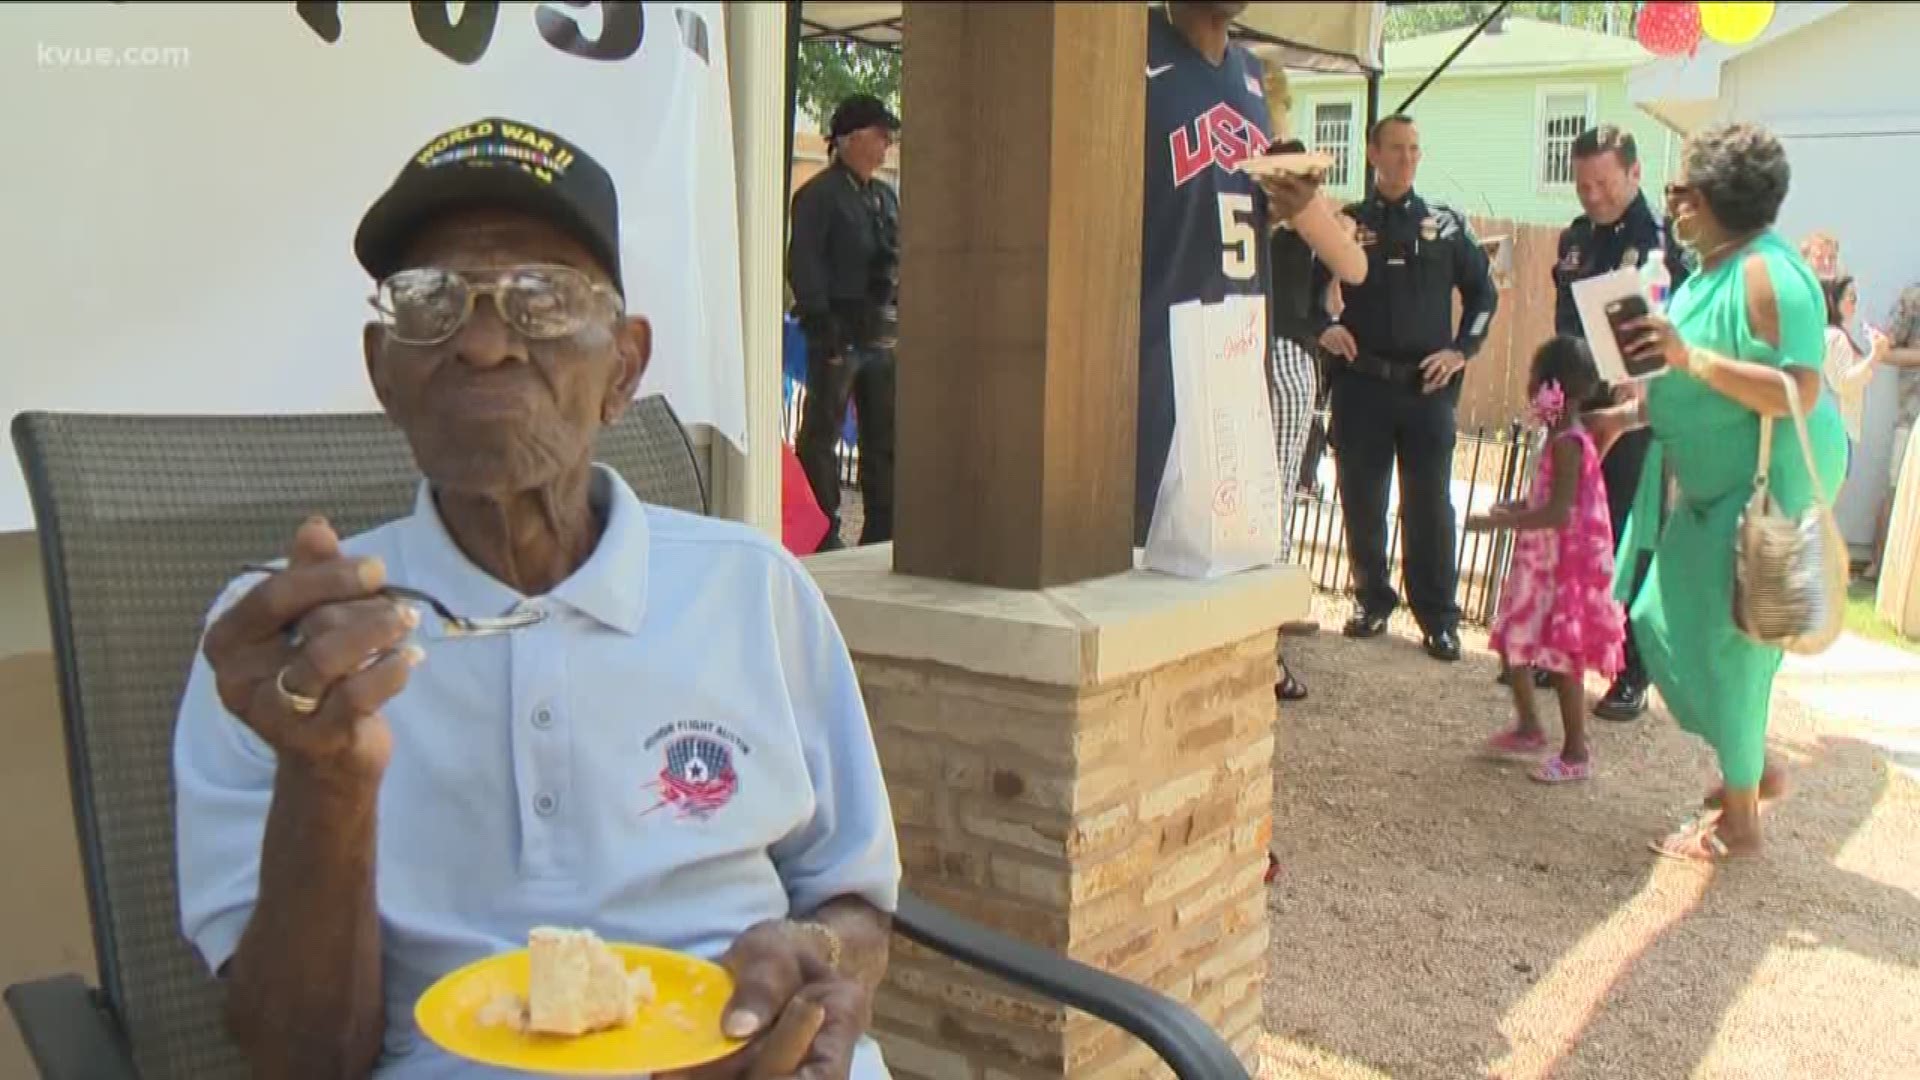 He stole the hearts of Central Texans and now Richard Overton's East Austin home will be a historic landmark.